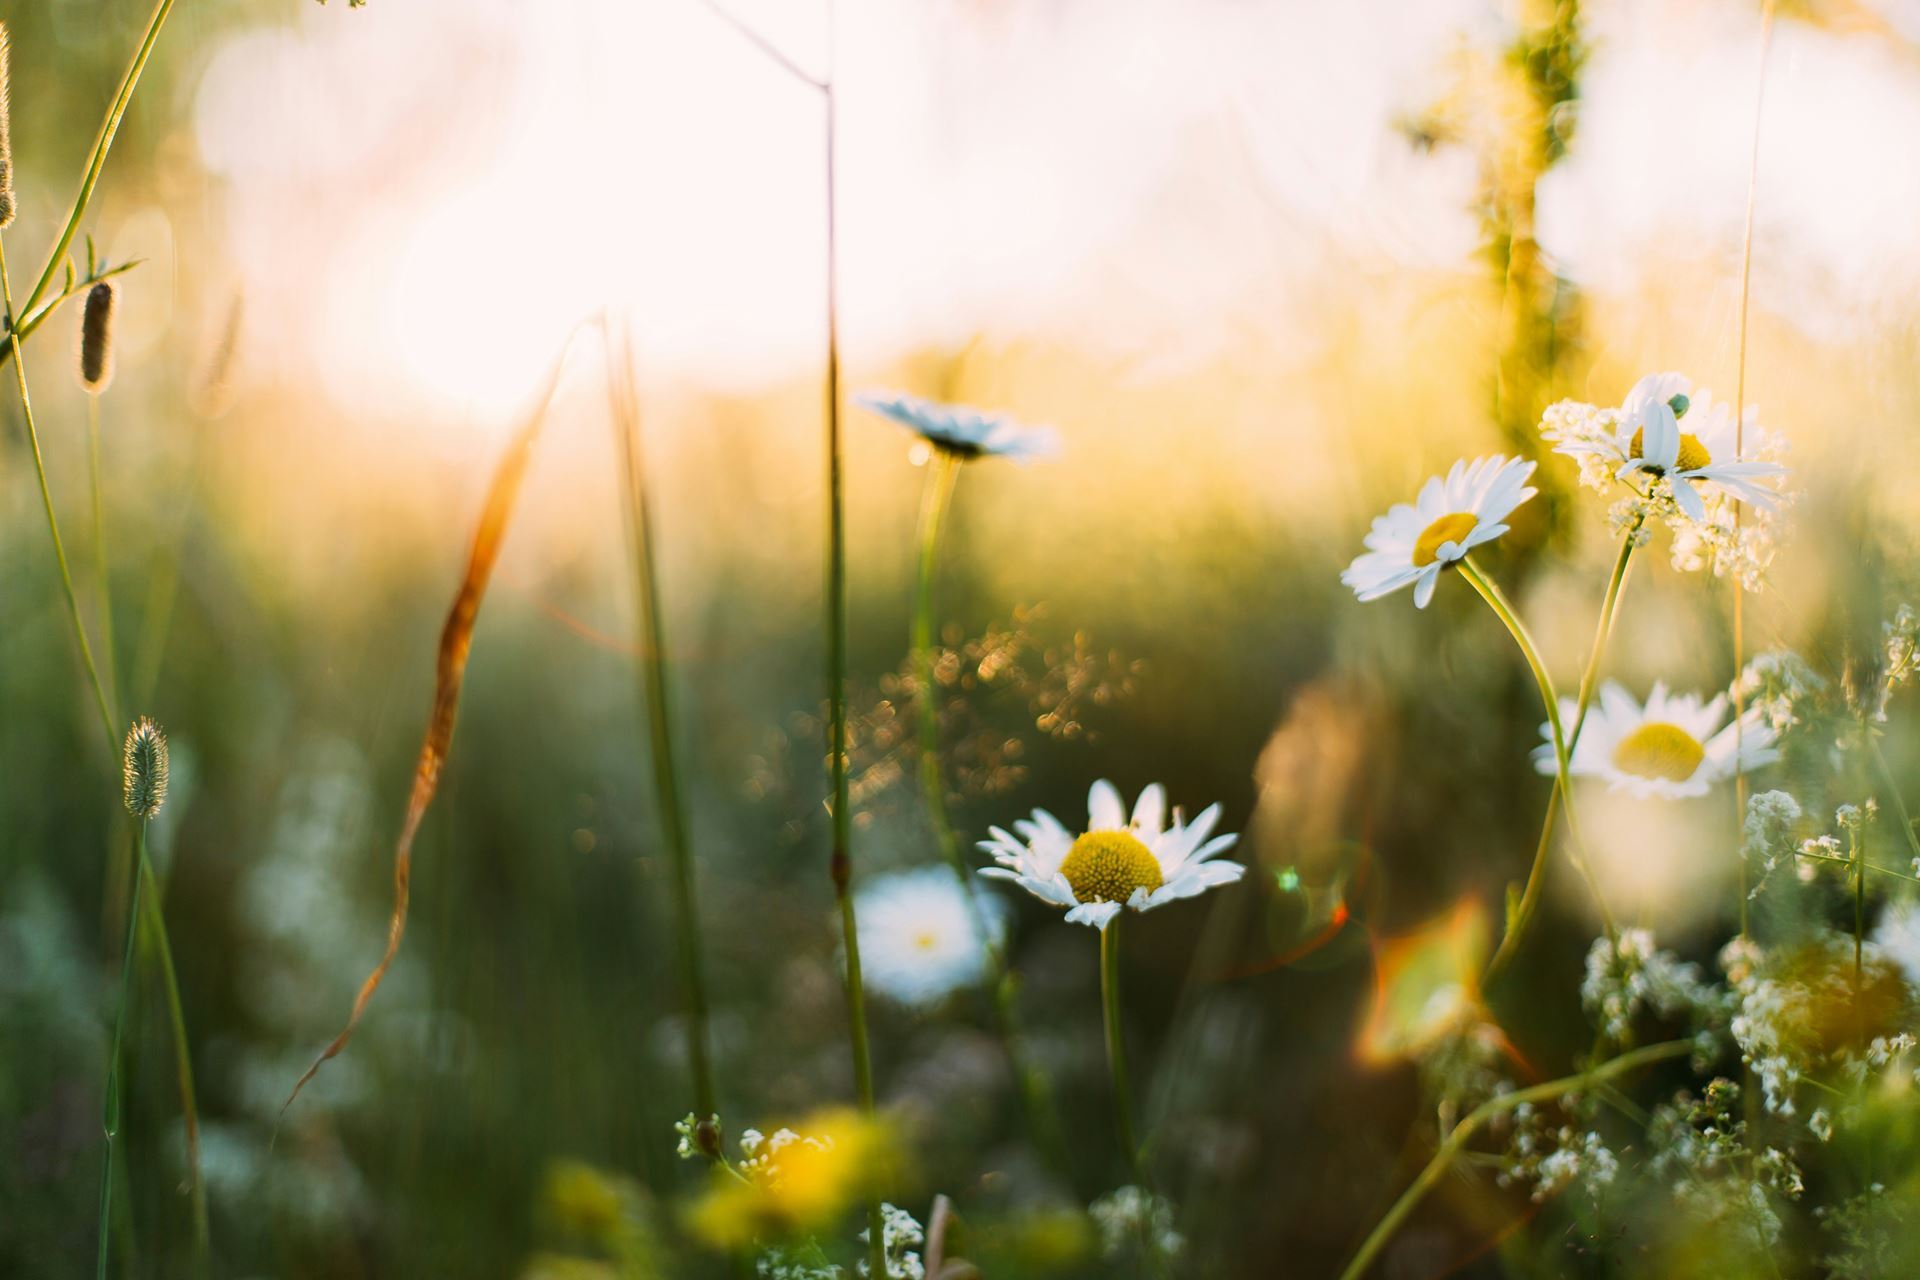 Stock image of daisies and tall grass in a green field